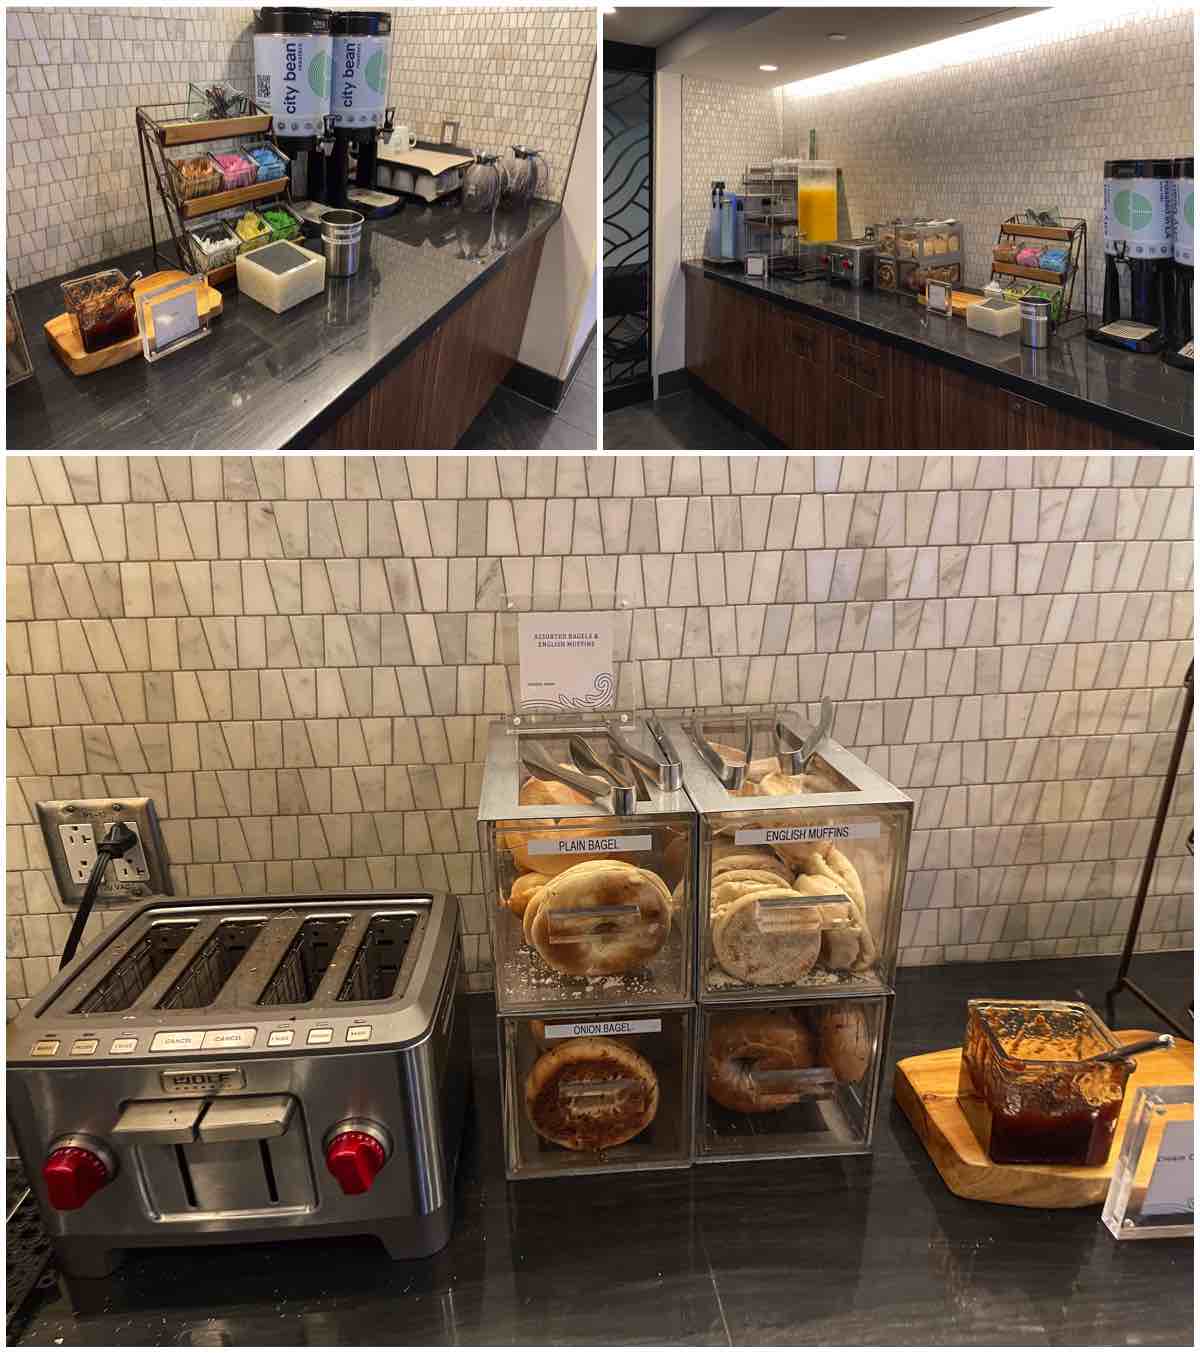 Amex Centurion Lounge LAX bagels and English muffins